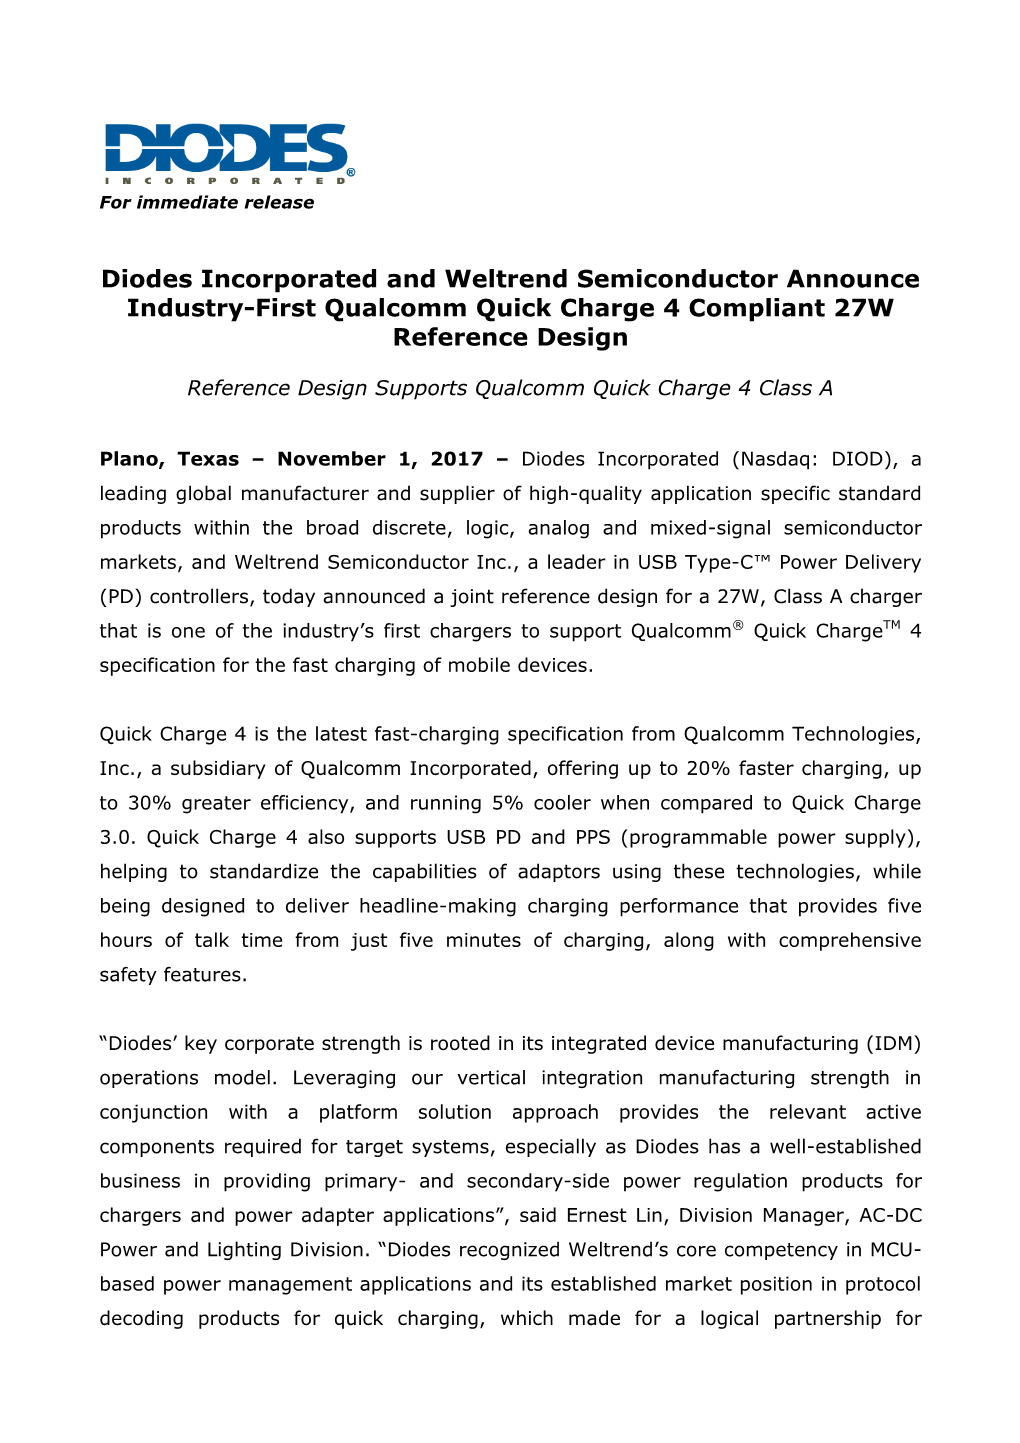 Diodes Incorporated and Weltrend Semiconductor Announce Industry-First Qualcomm Quick Charge 4 Compliant 27W Reference Design